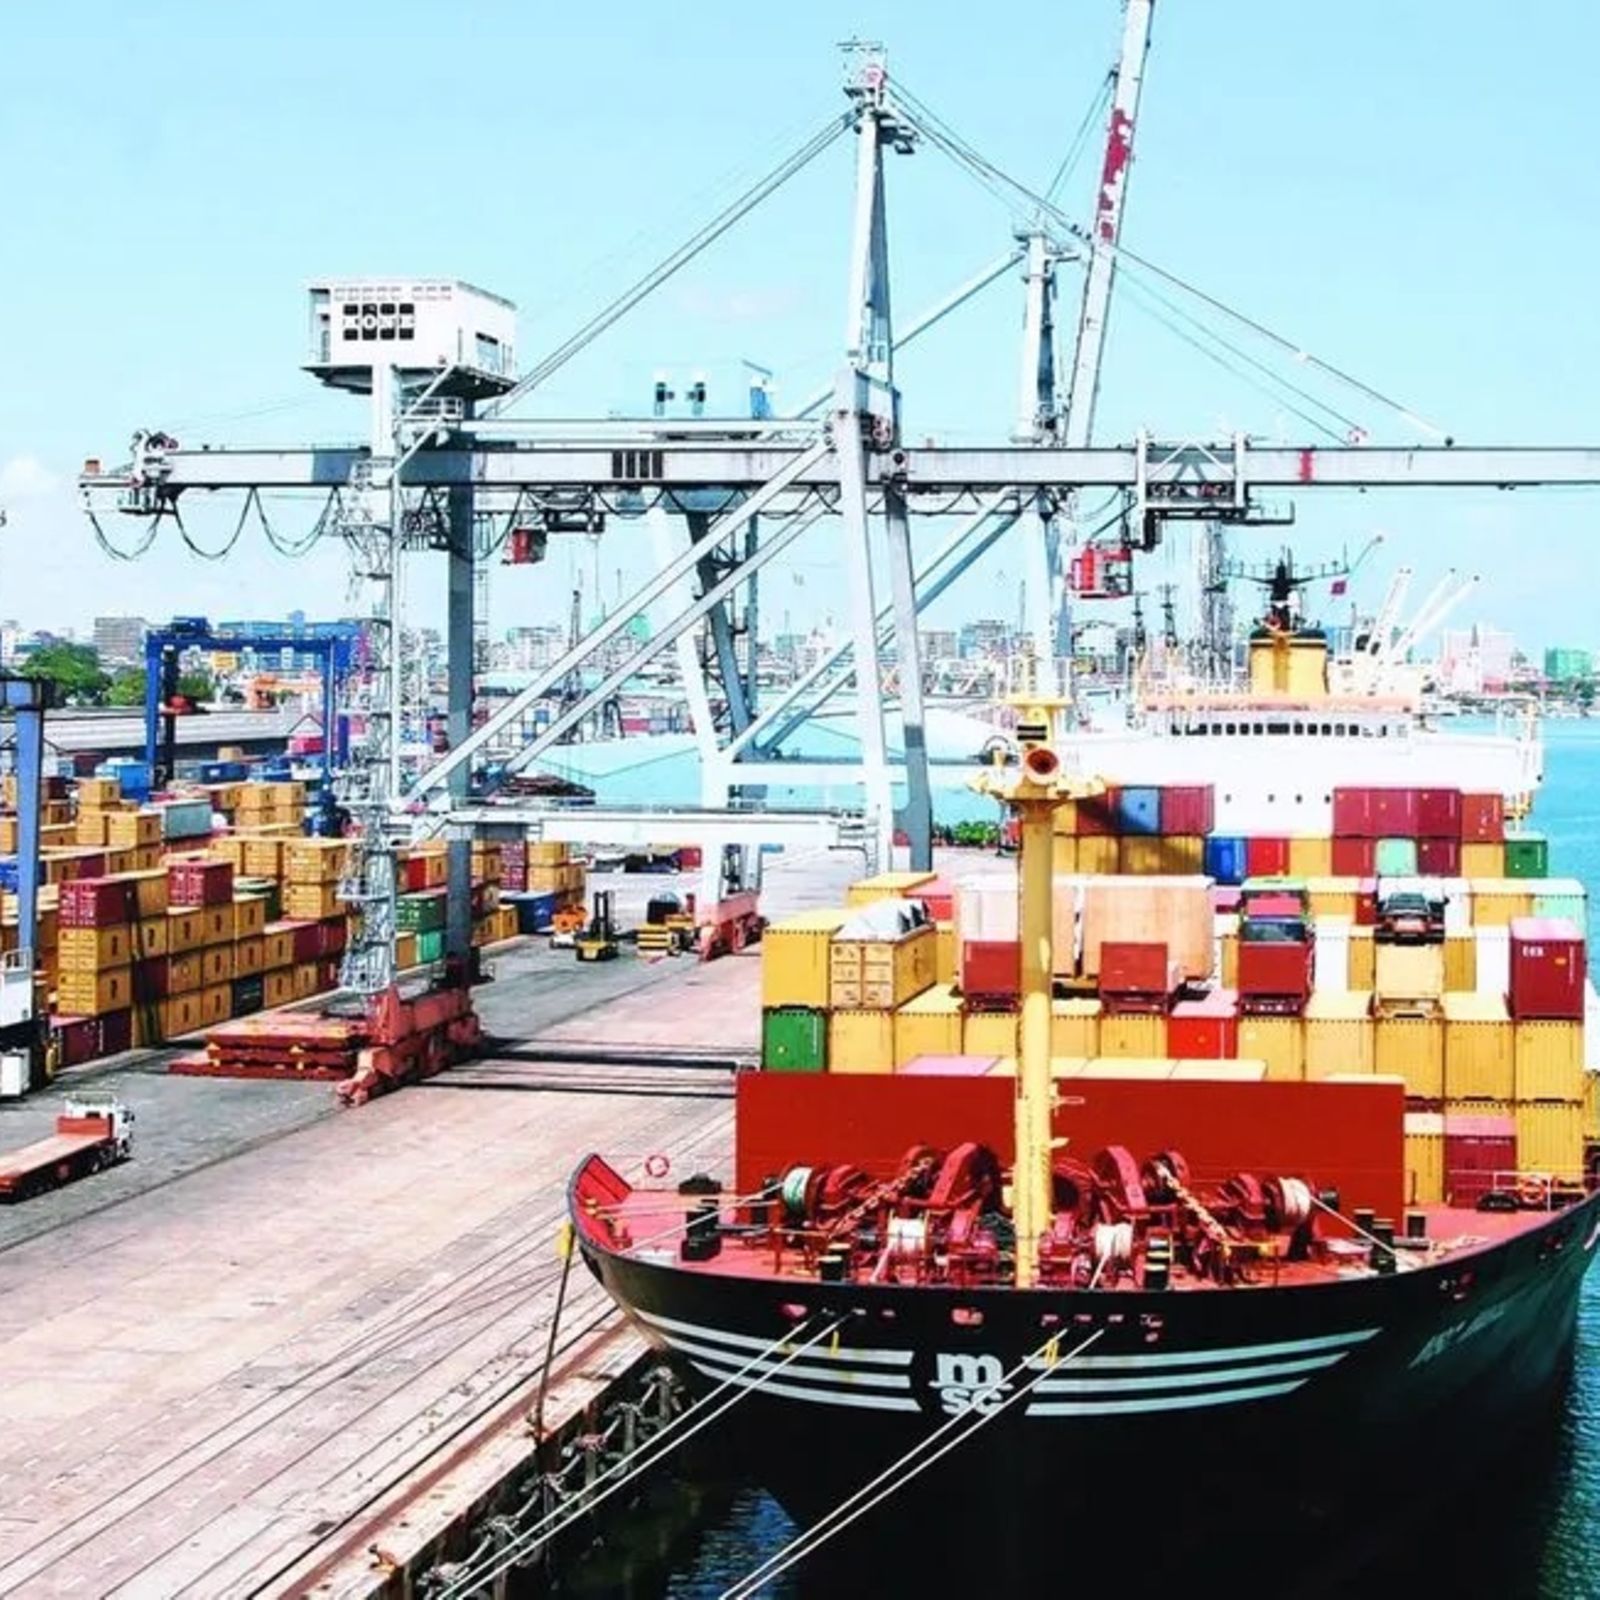 “Legal Battle Over Tanzania-Dubai Port Deal Takes a Turn as Tanzania Withdraws Proposed Rule Changes”